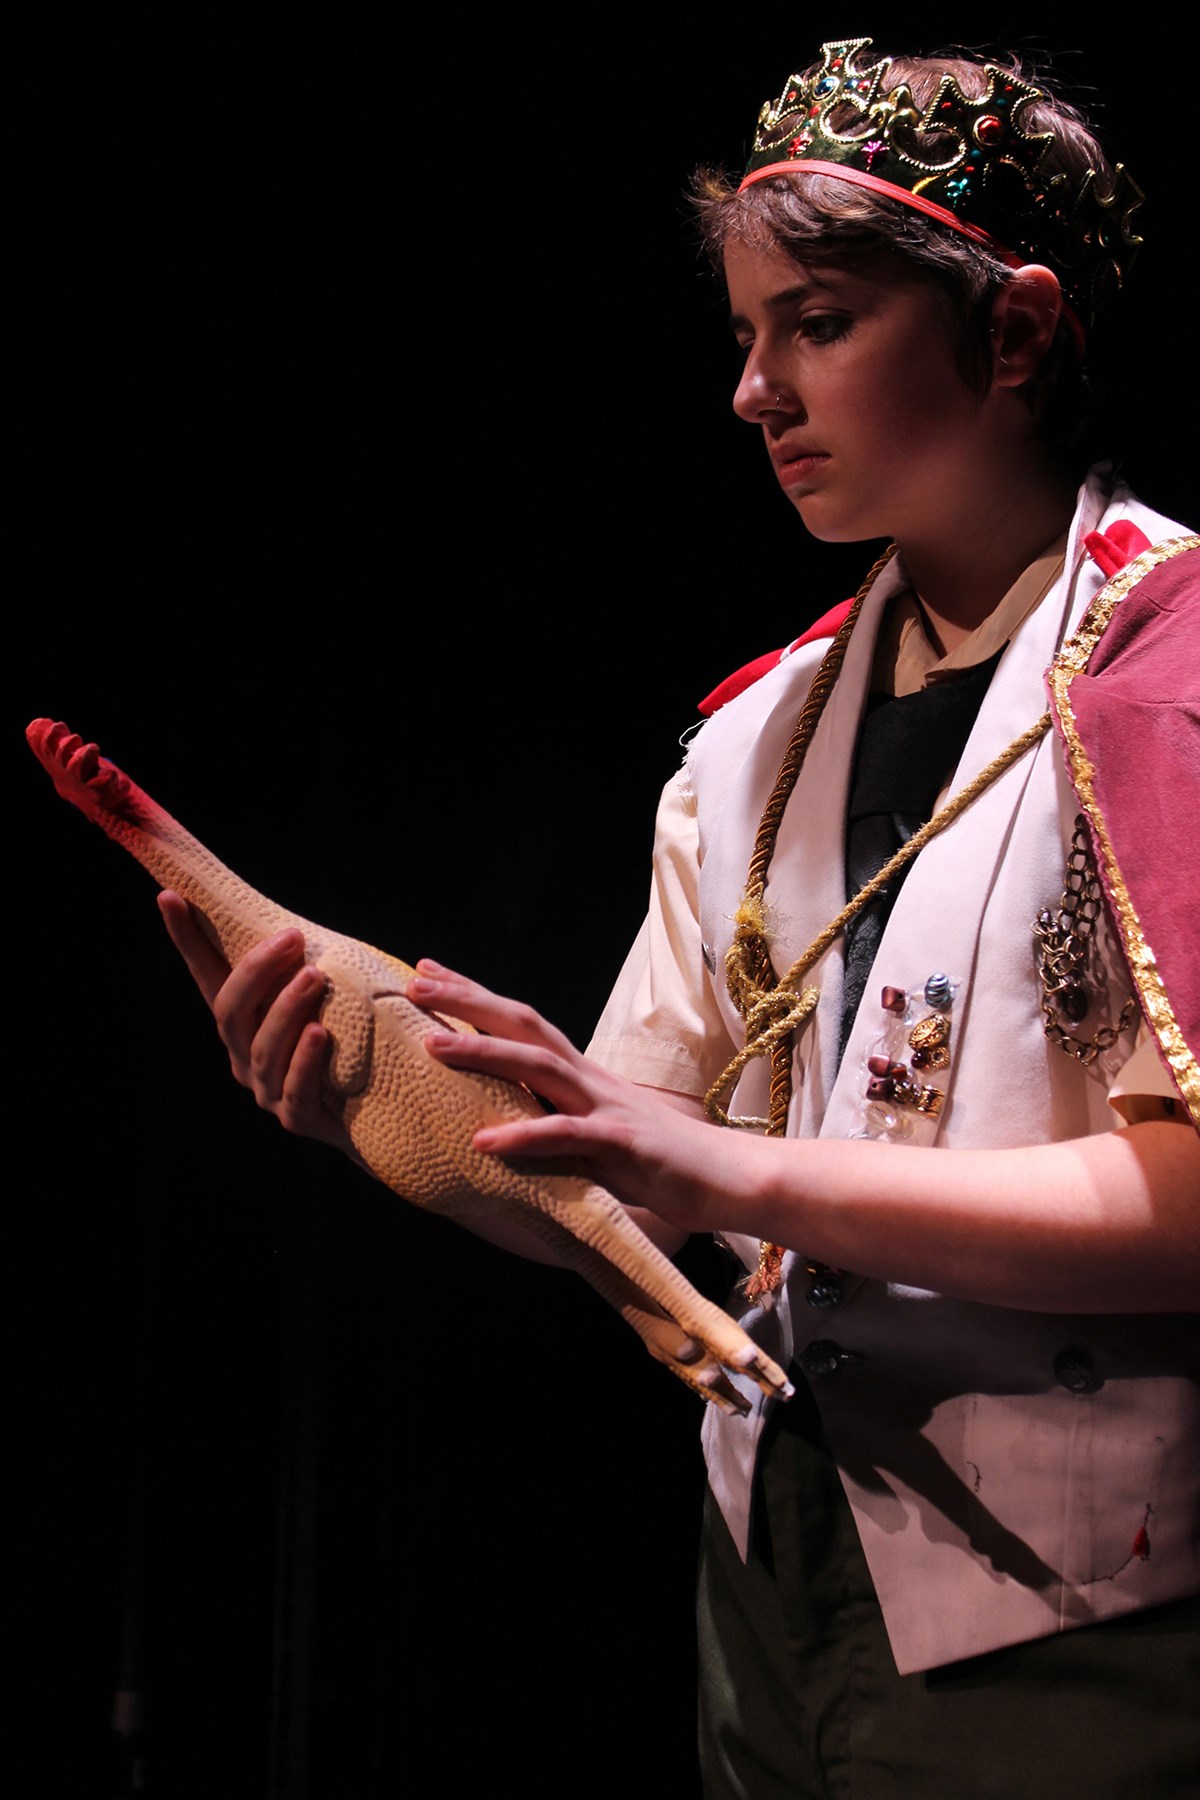 A female student wearing a crown and holding a rubber chicken on stage during a UMass Lowell Theatre Arts production.